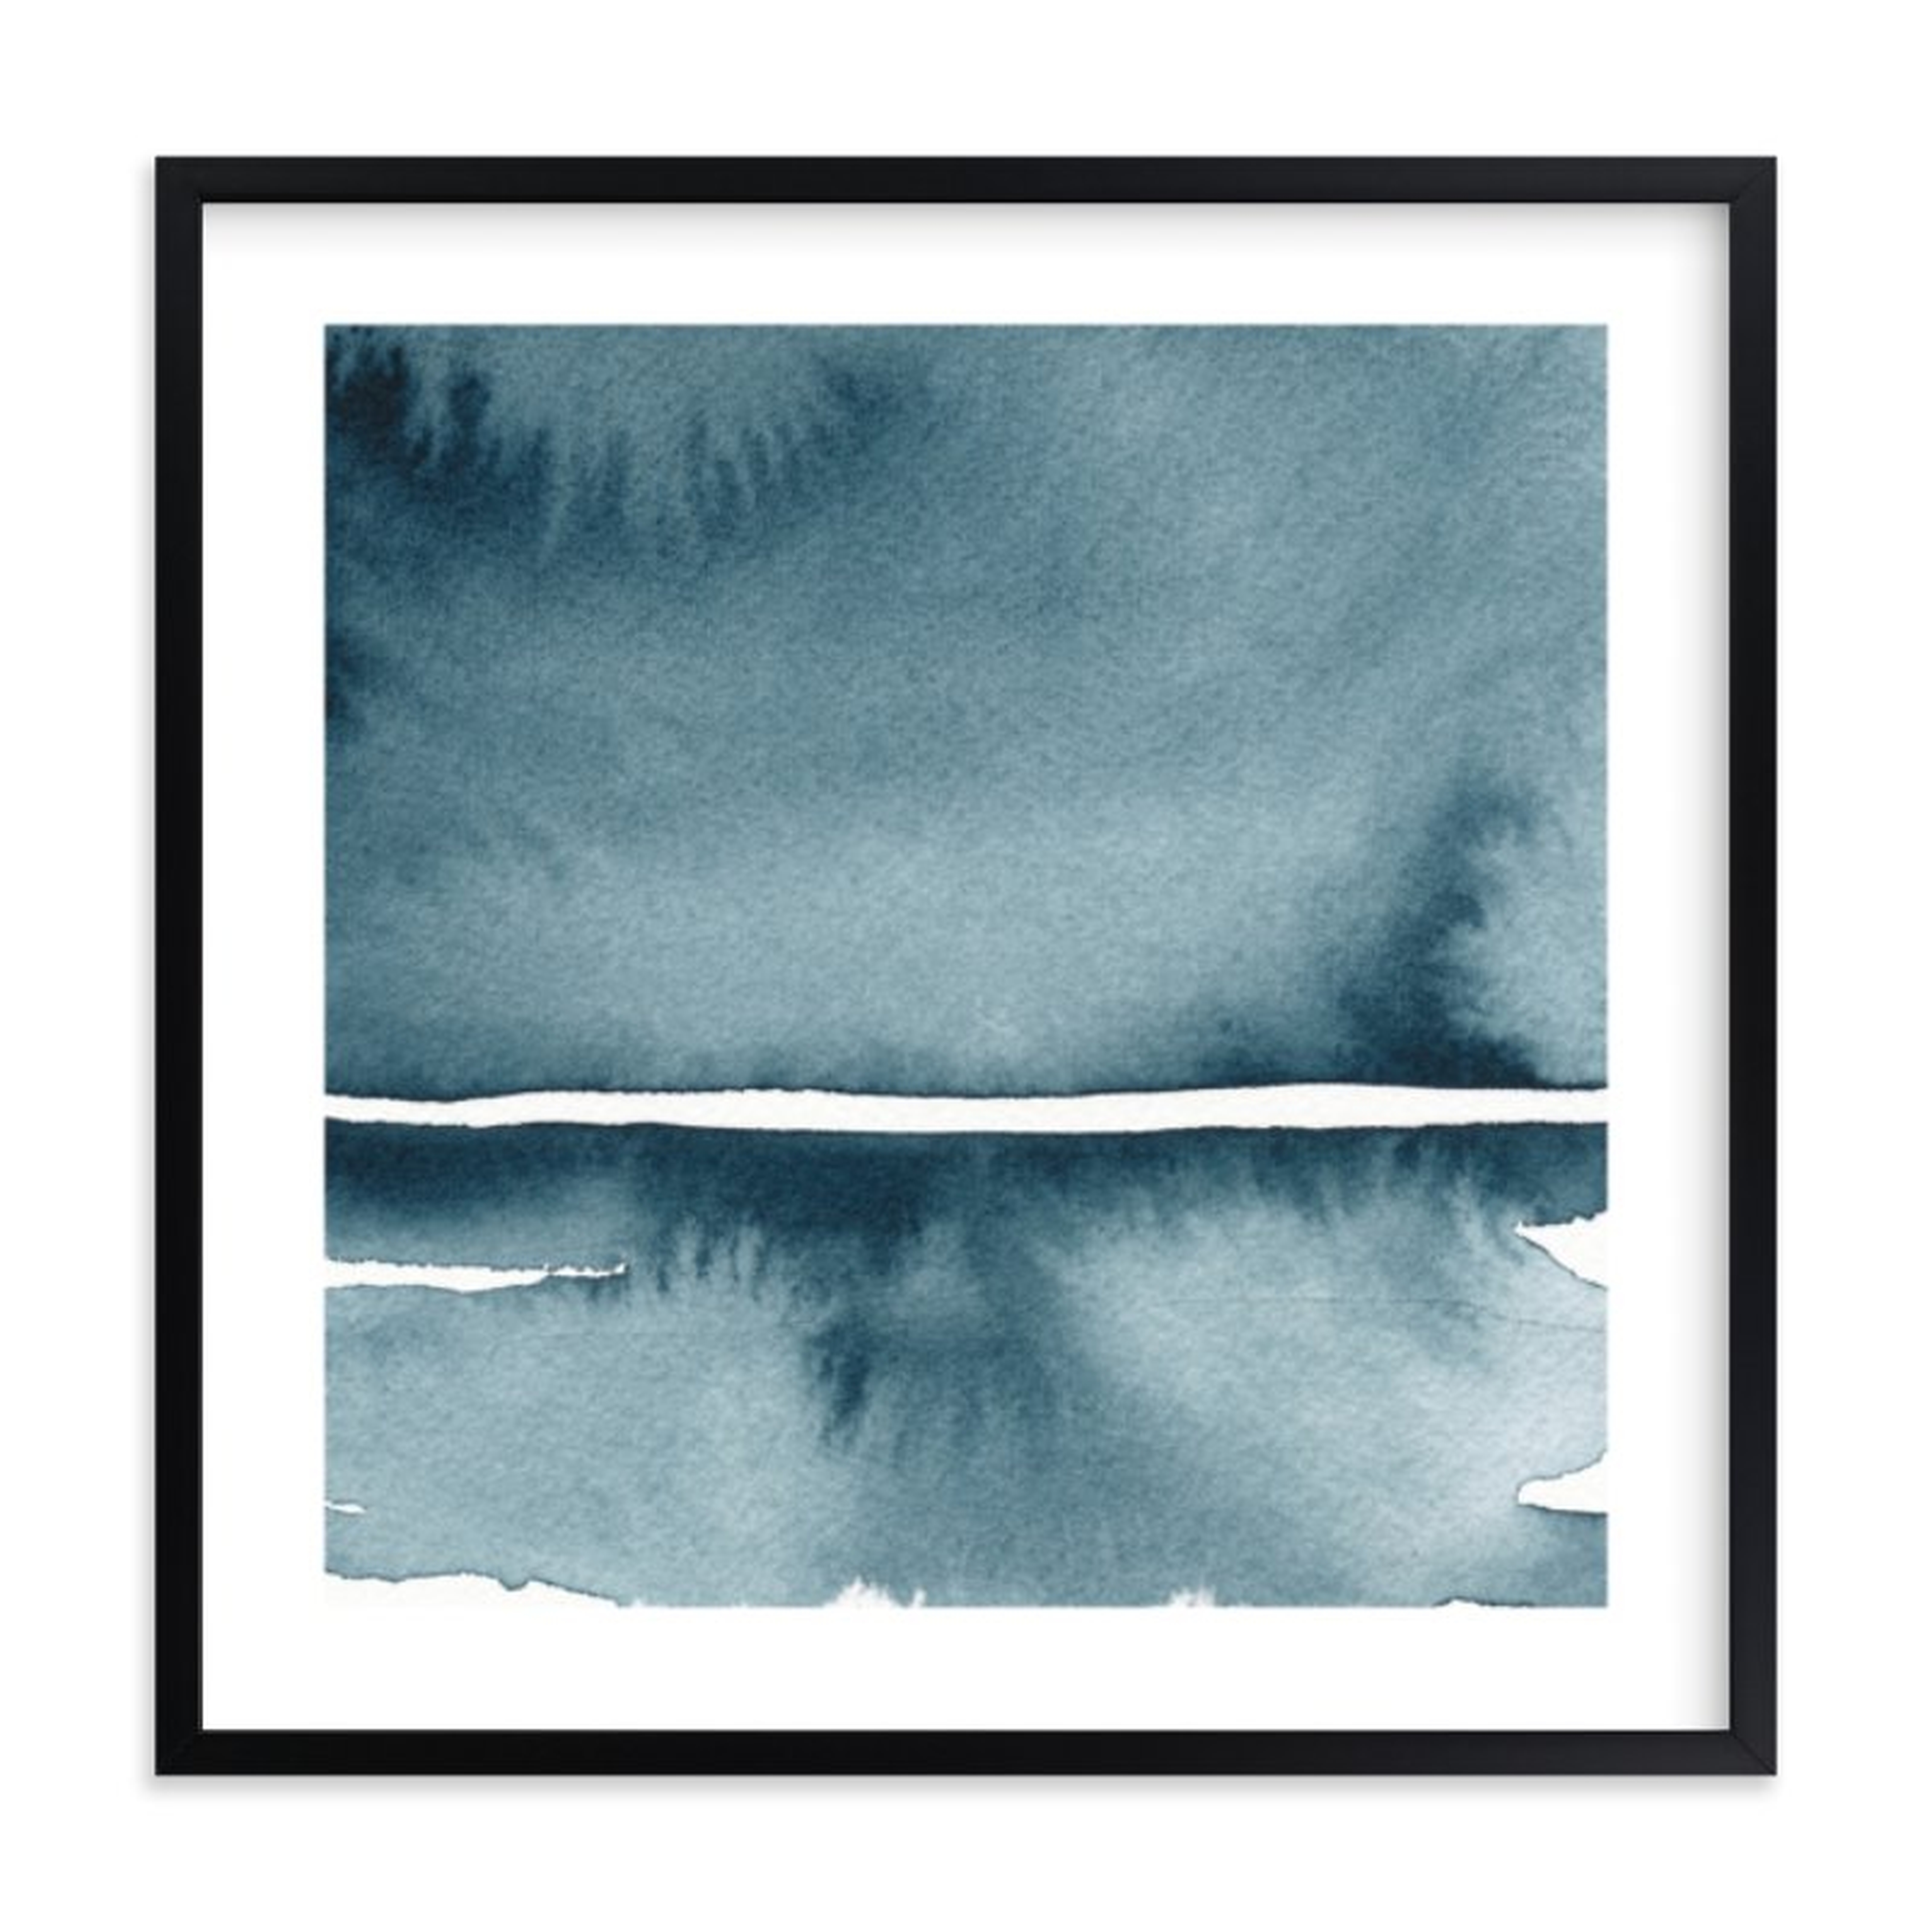 Winter Windswept, 24" x 24" in Rich Black Wood Frame with White Border - Minted